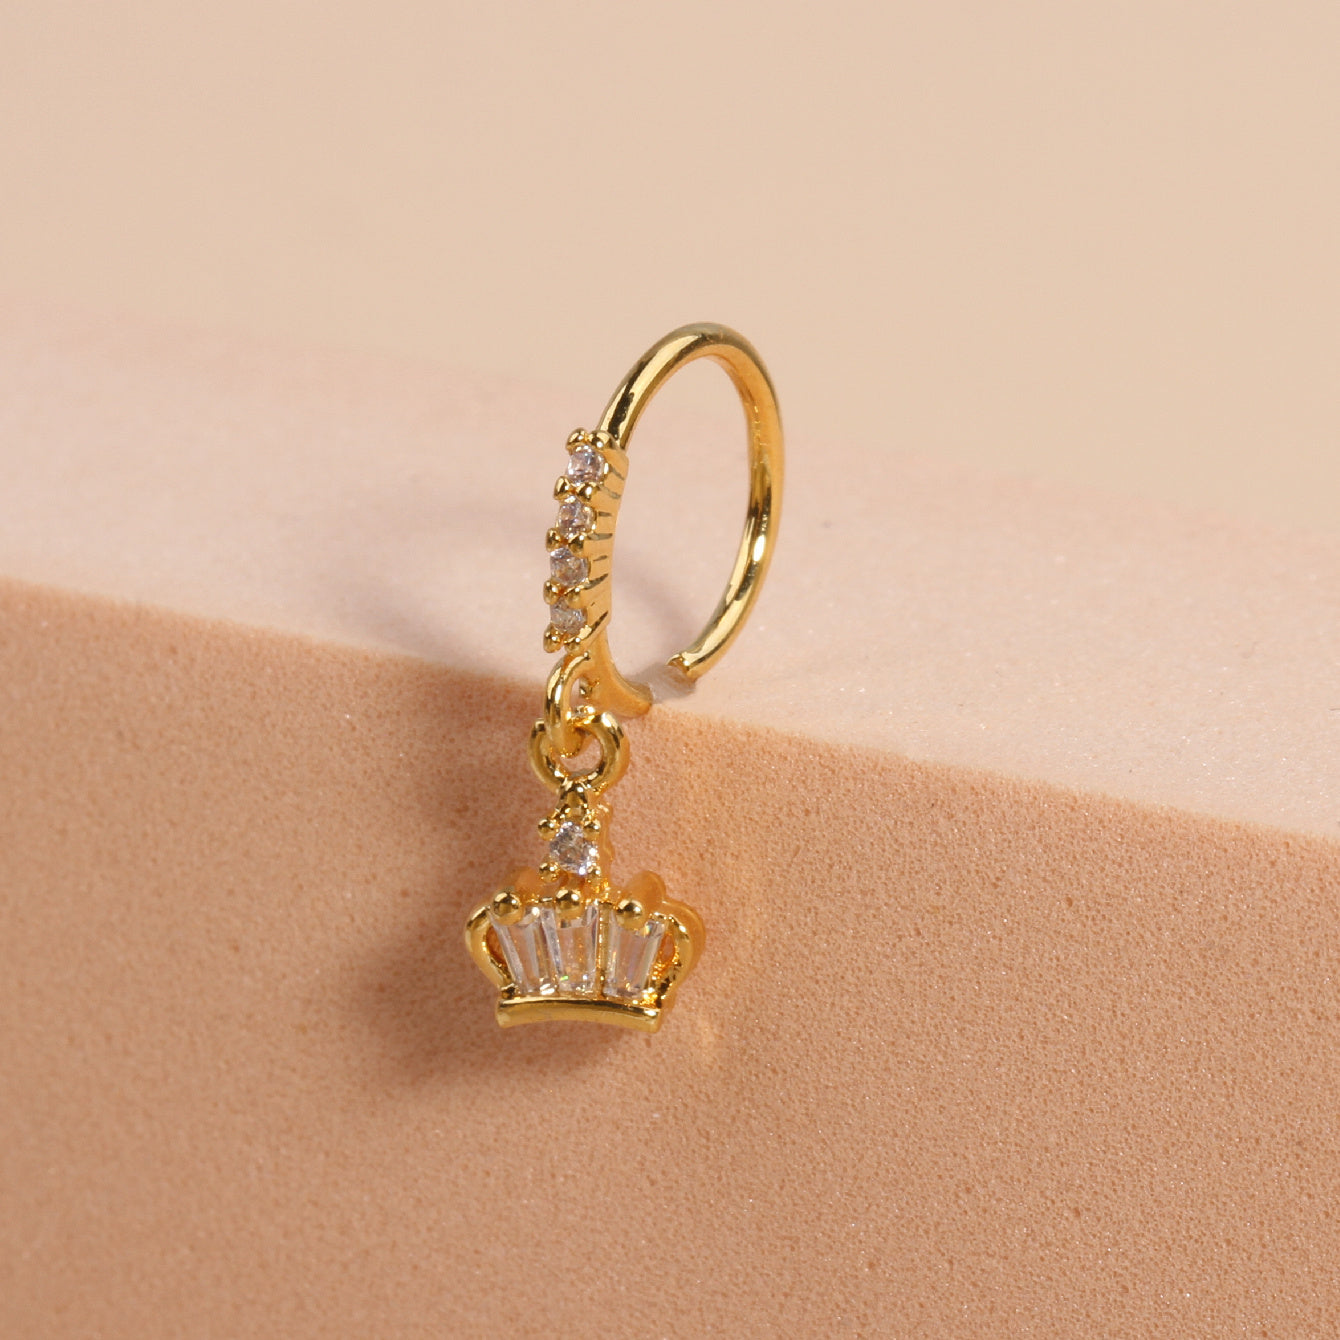 Add a Royal Touch to Your Look with 1pc Shiny Zircon Crown Dangle Nose Ring - Perfect Body Piercing Jewelry